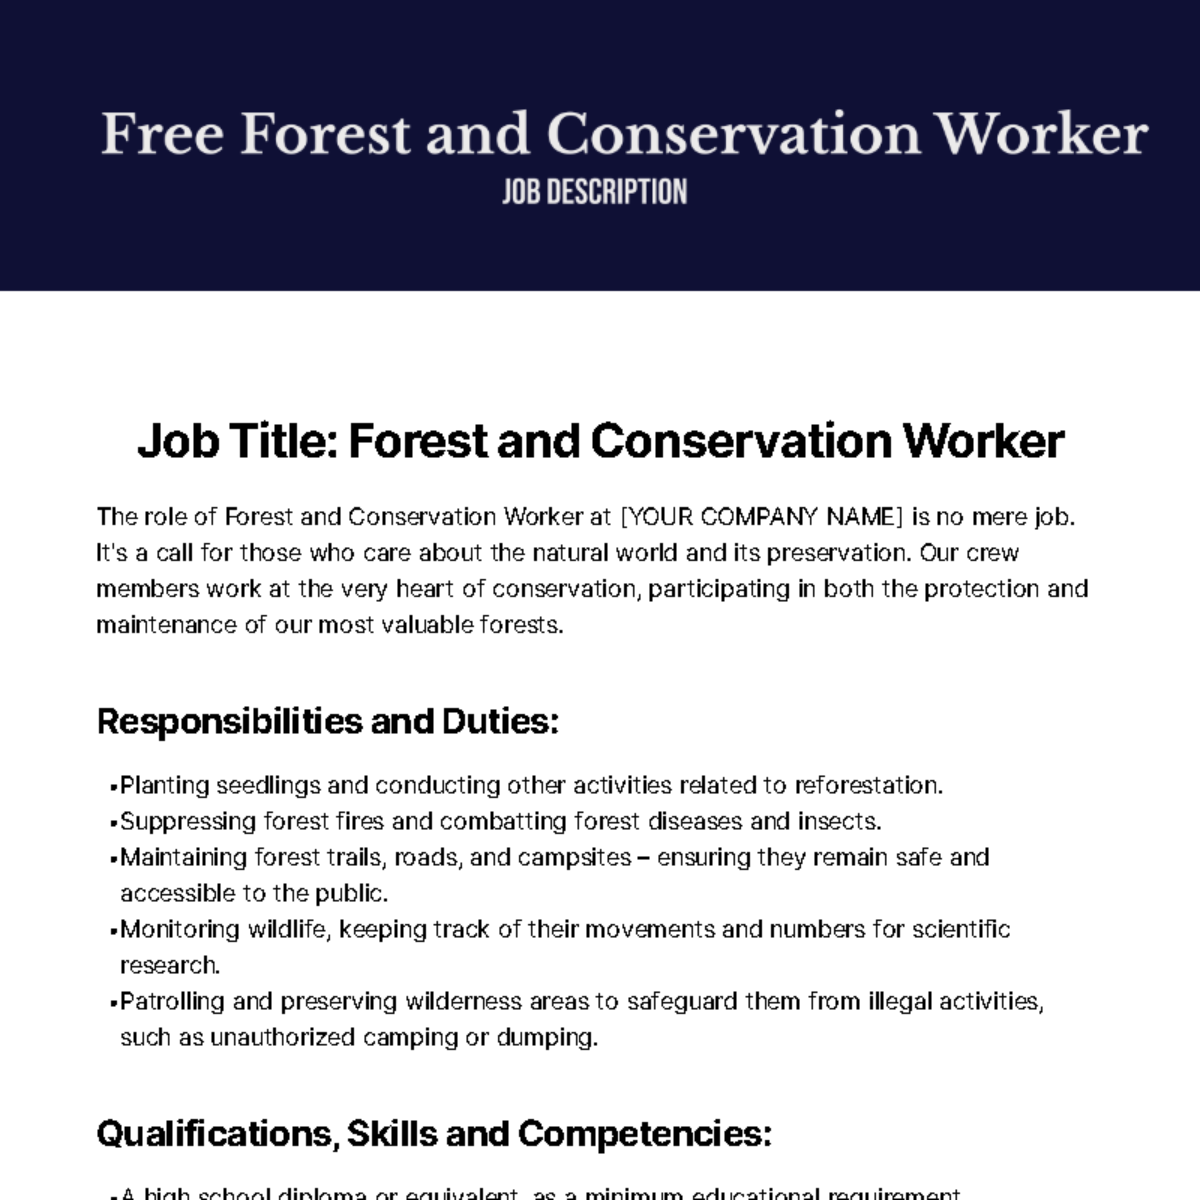 Forest and Conservation Worker Job Description Template